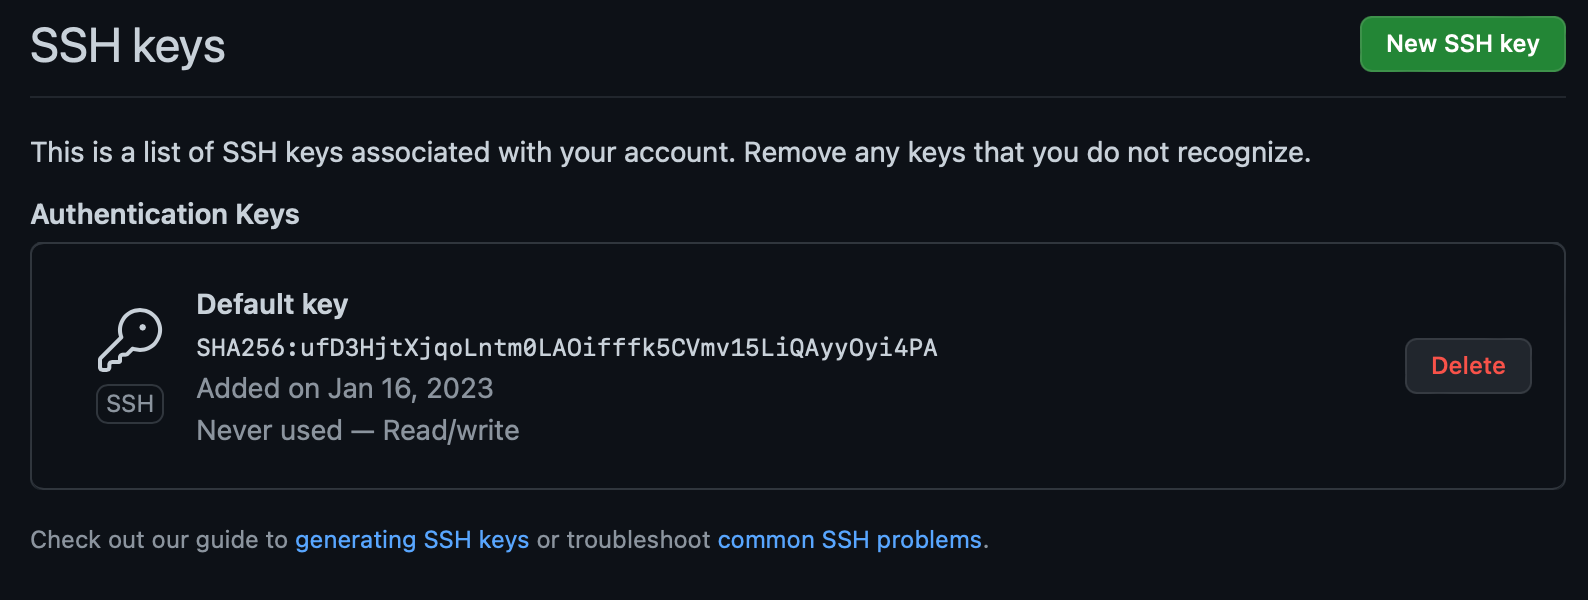 Screenshot showing the GitHub SSH key management where a SSH key is registered